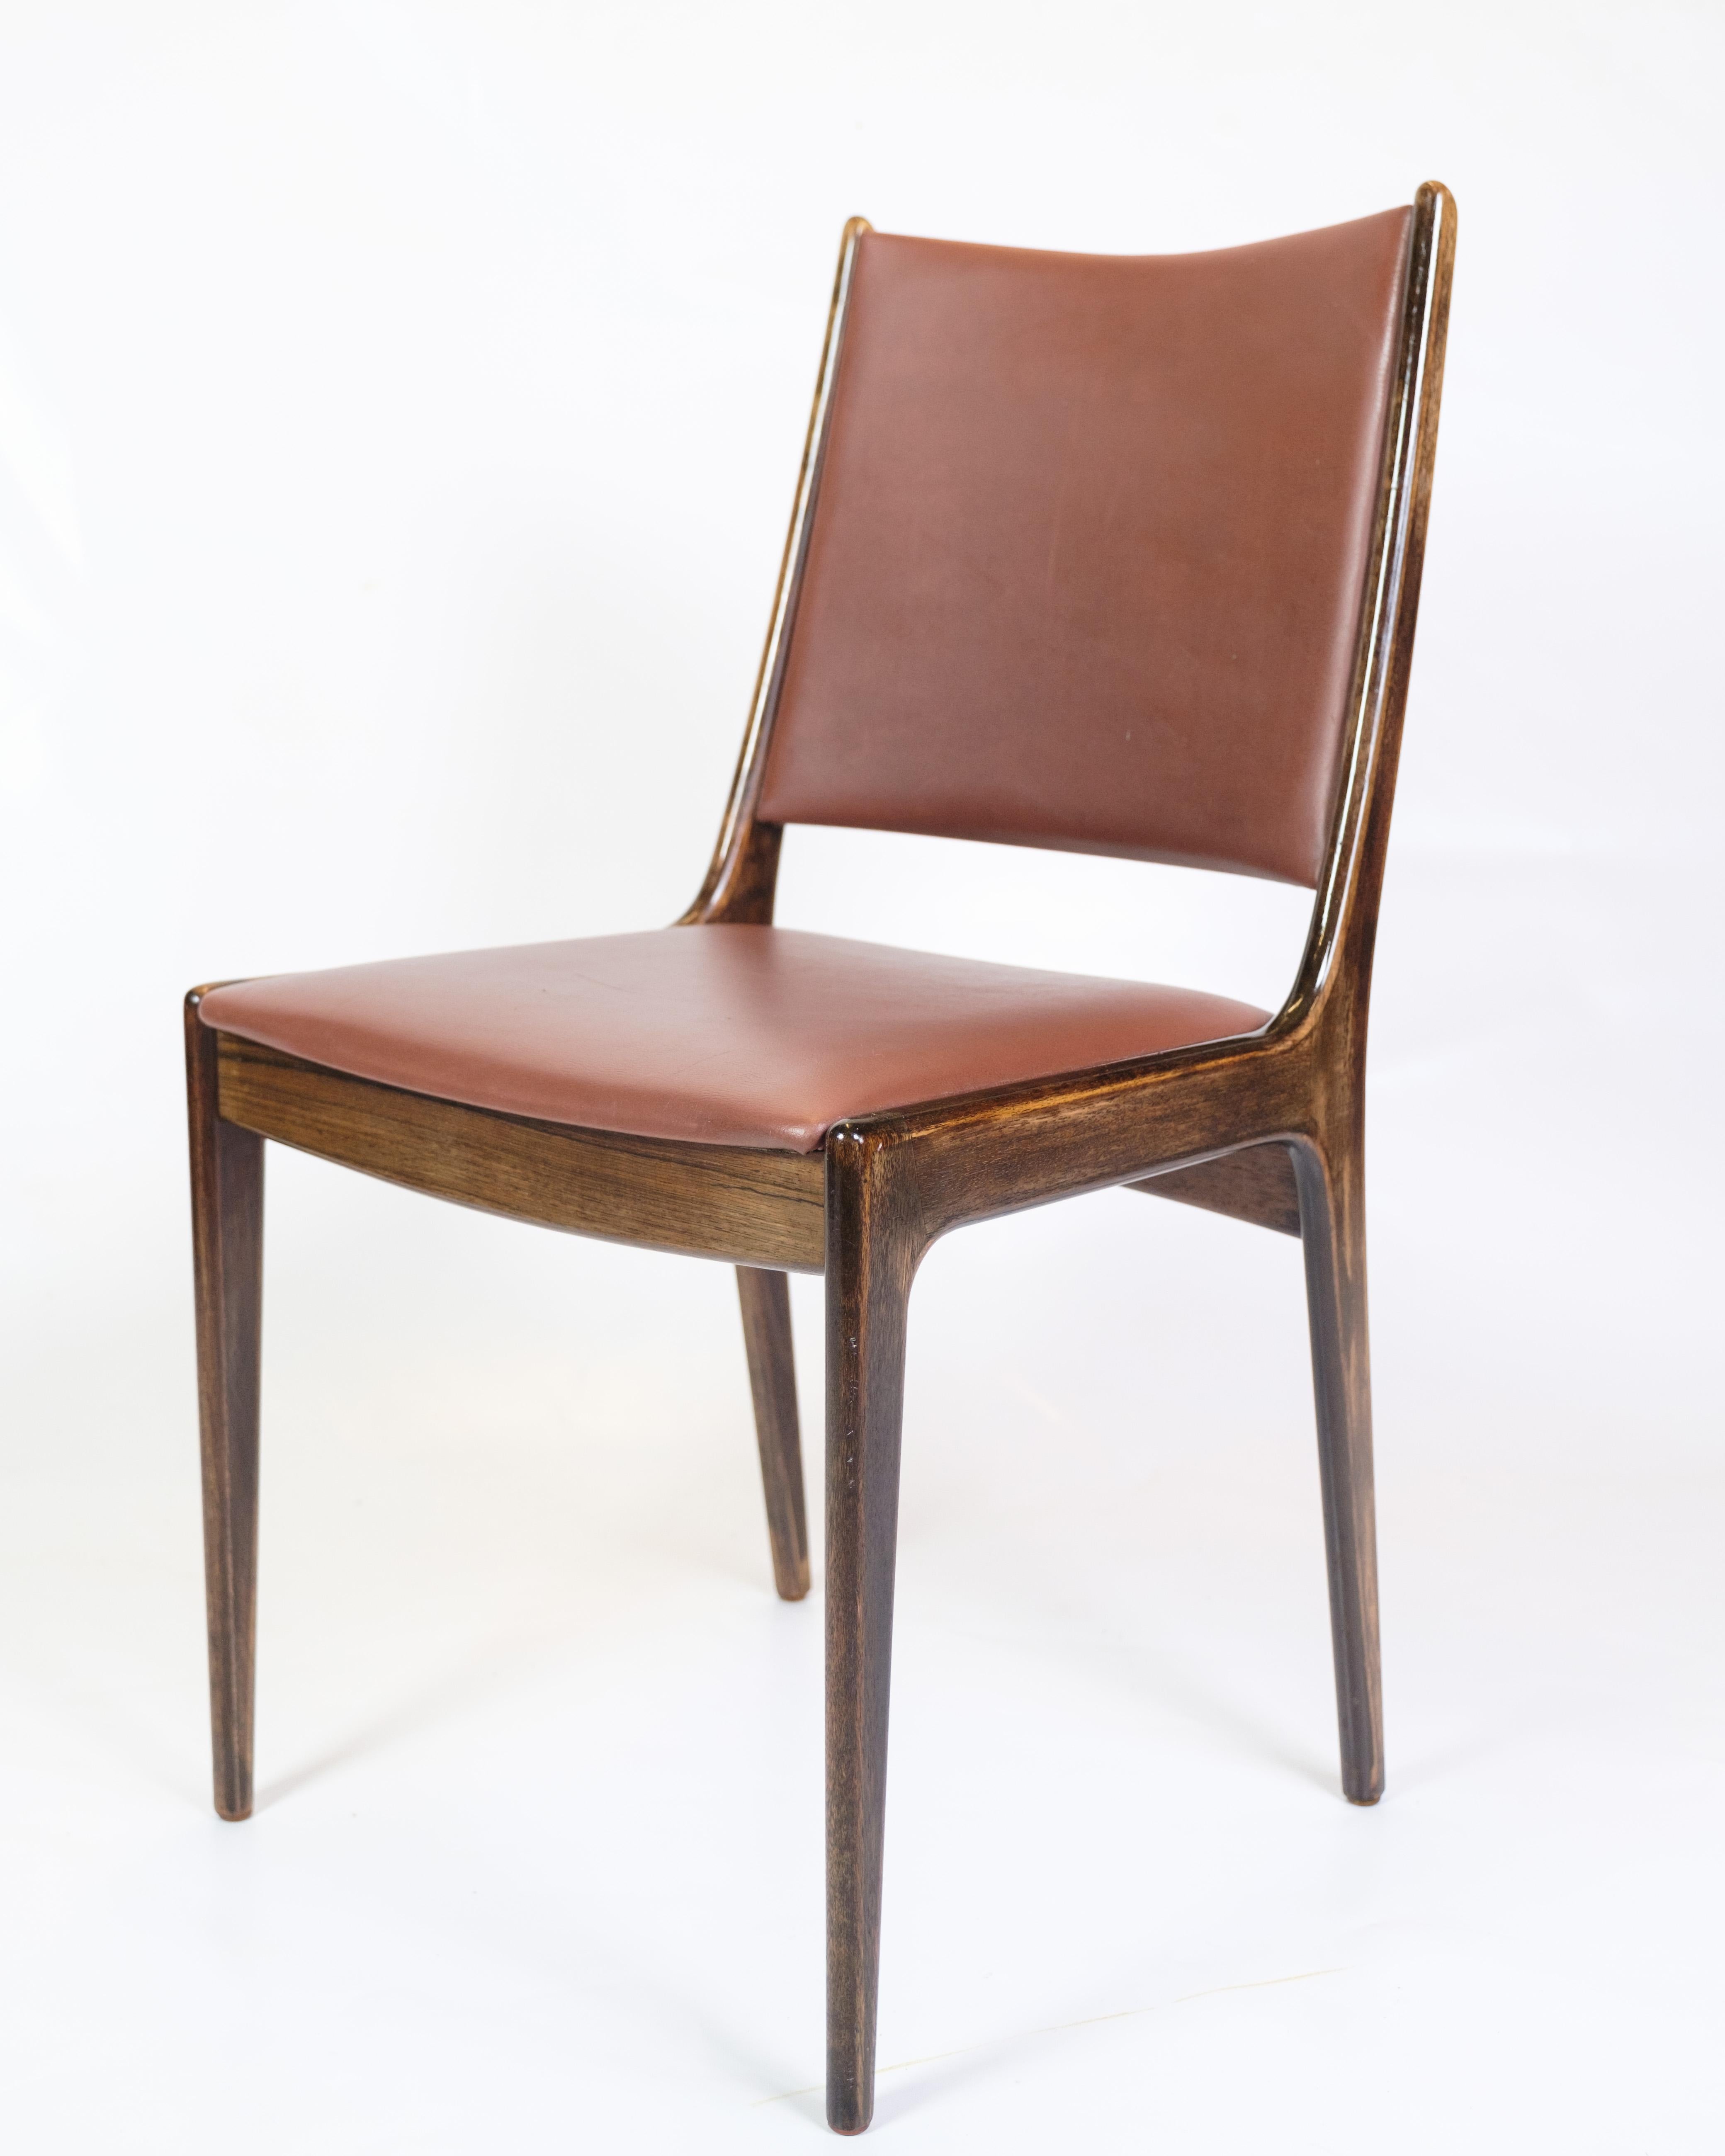 Mid-Century Modern Set Of 4 Dining Room Chairs Made In Rosewood By Johannes Andersen From 1960s For Sale